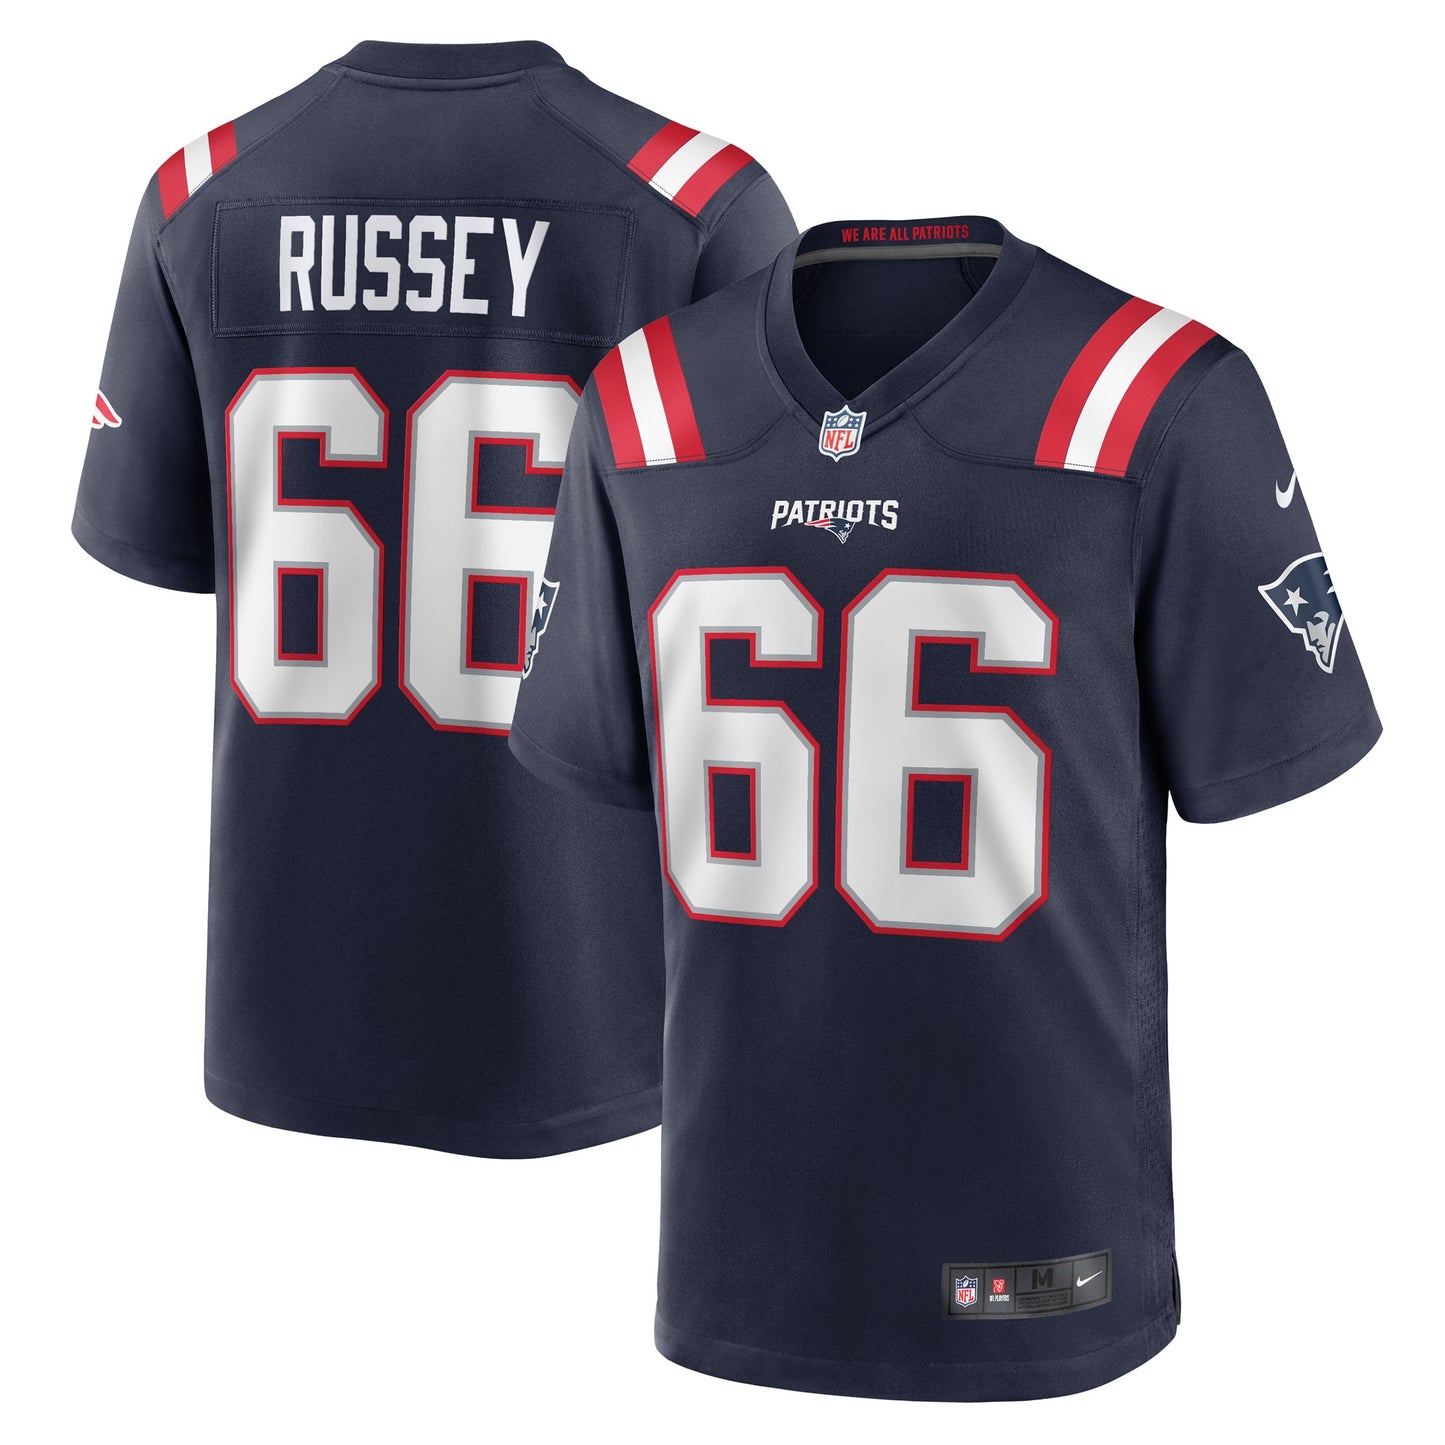 Kody Russey New England Patriots Nike Game Player Jersey - Navy